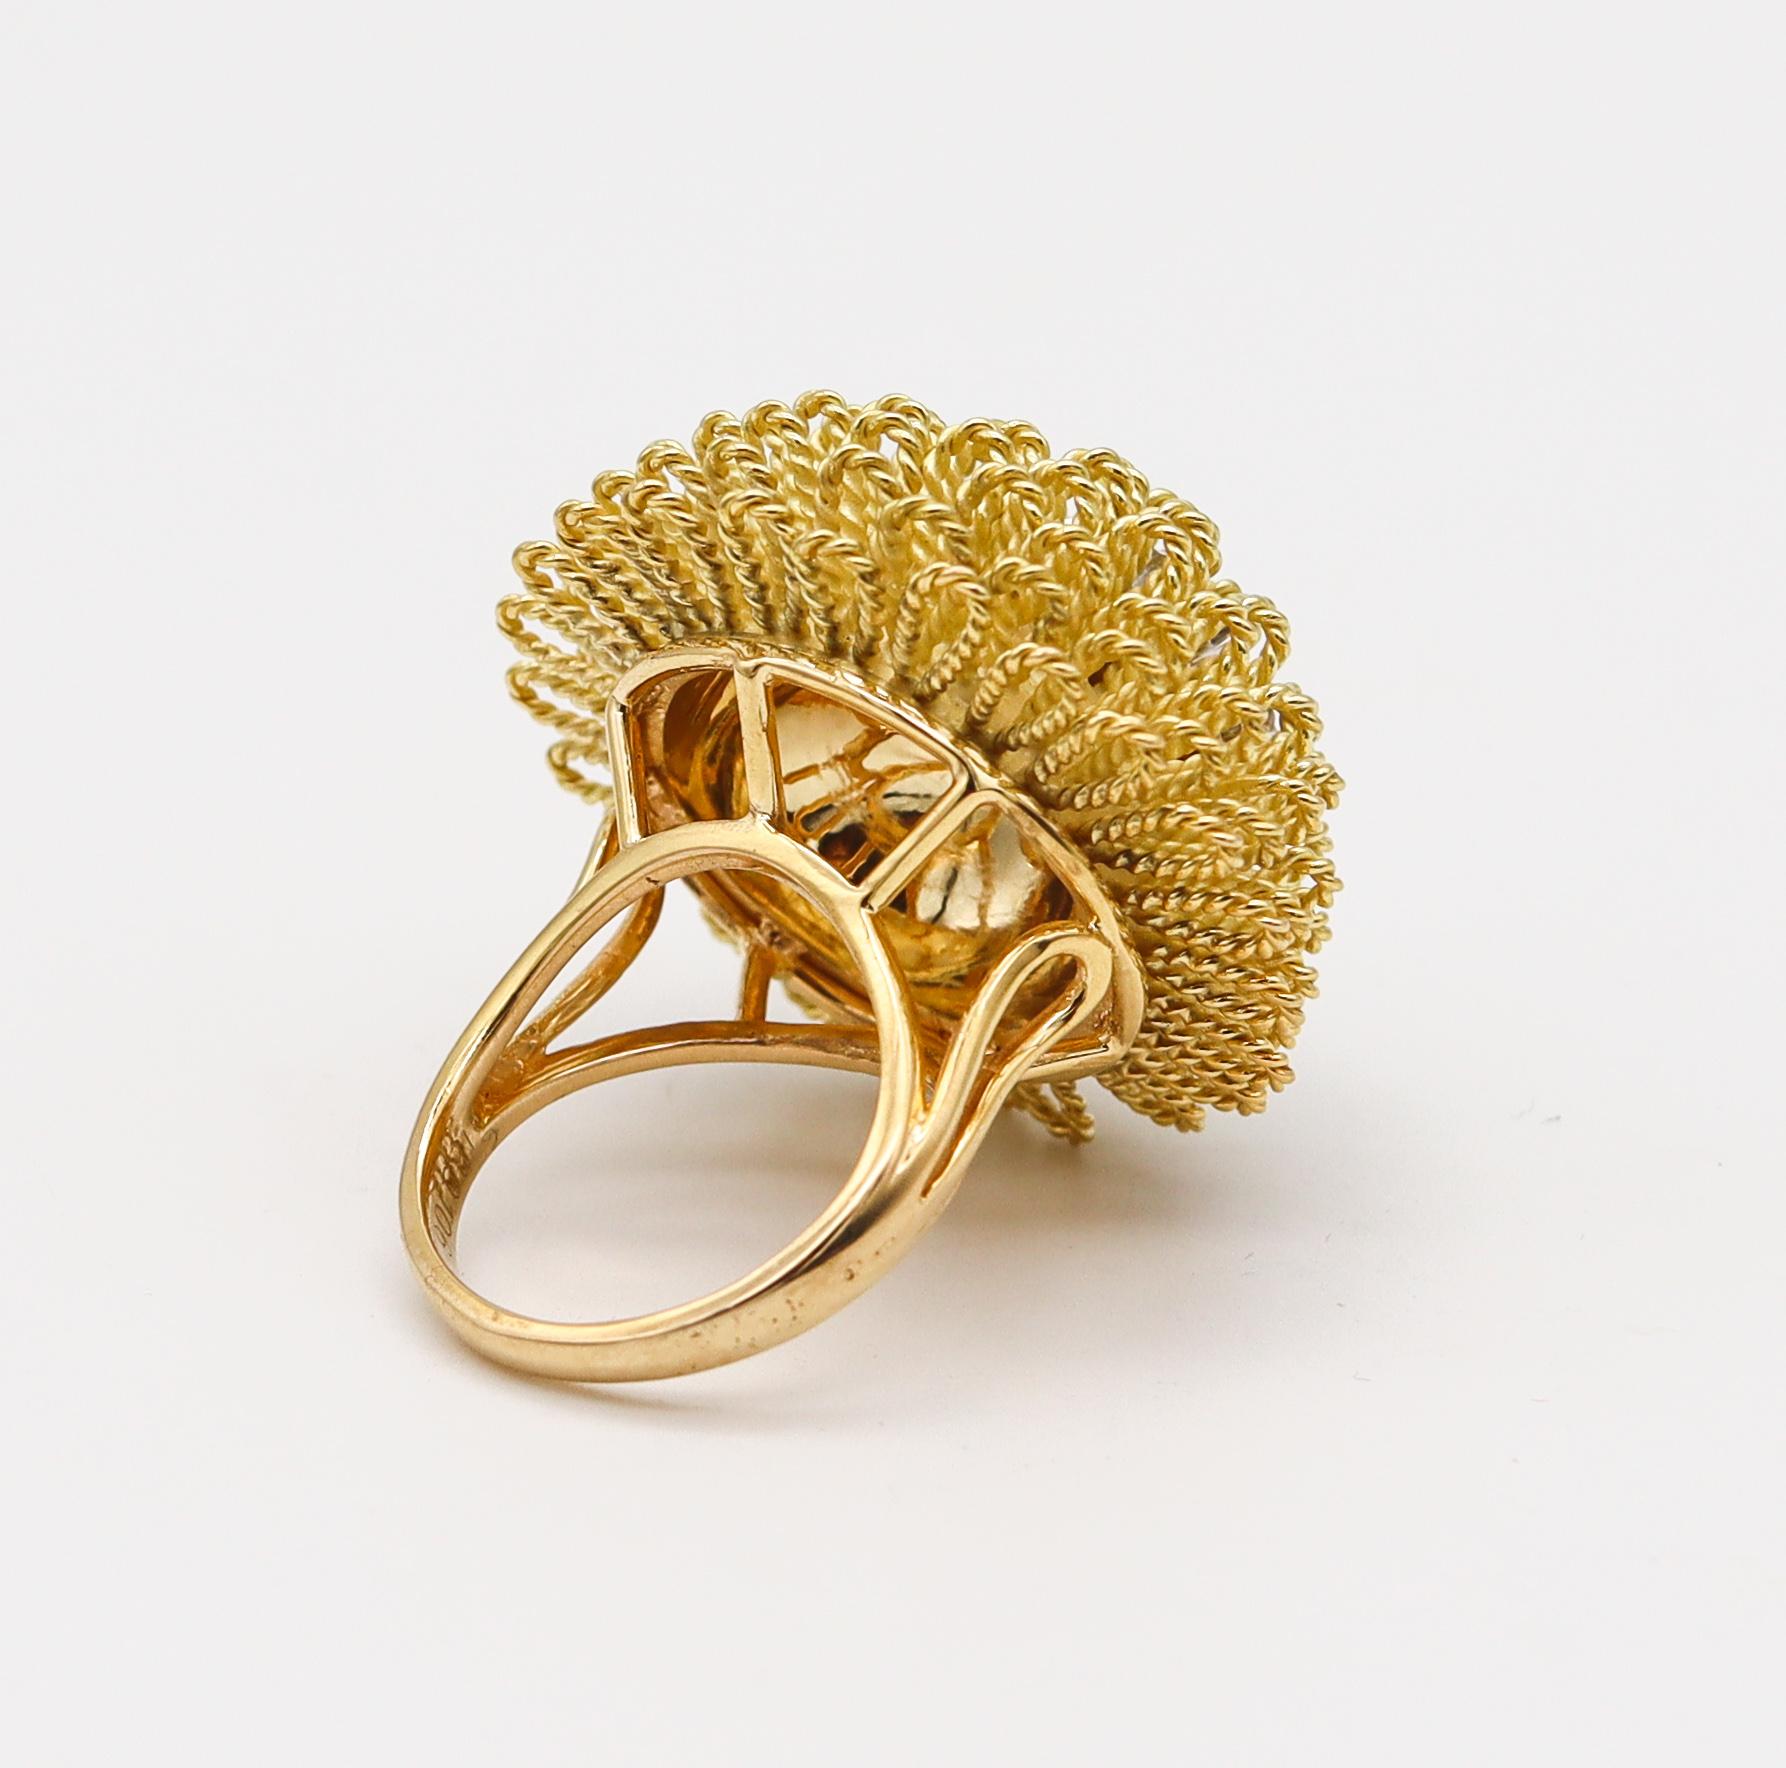 Italian Retro 1960 Modern Cocktail Ring 18Kt Gold And Platinum With VS Diamonds For Sale 1